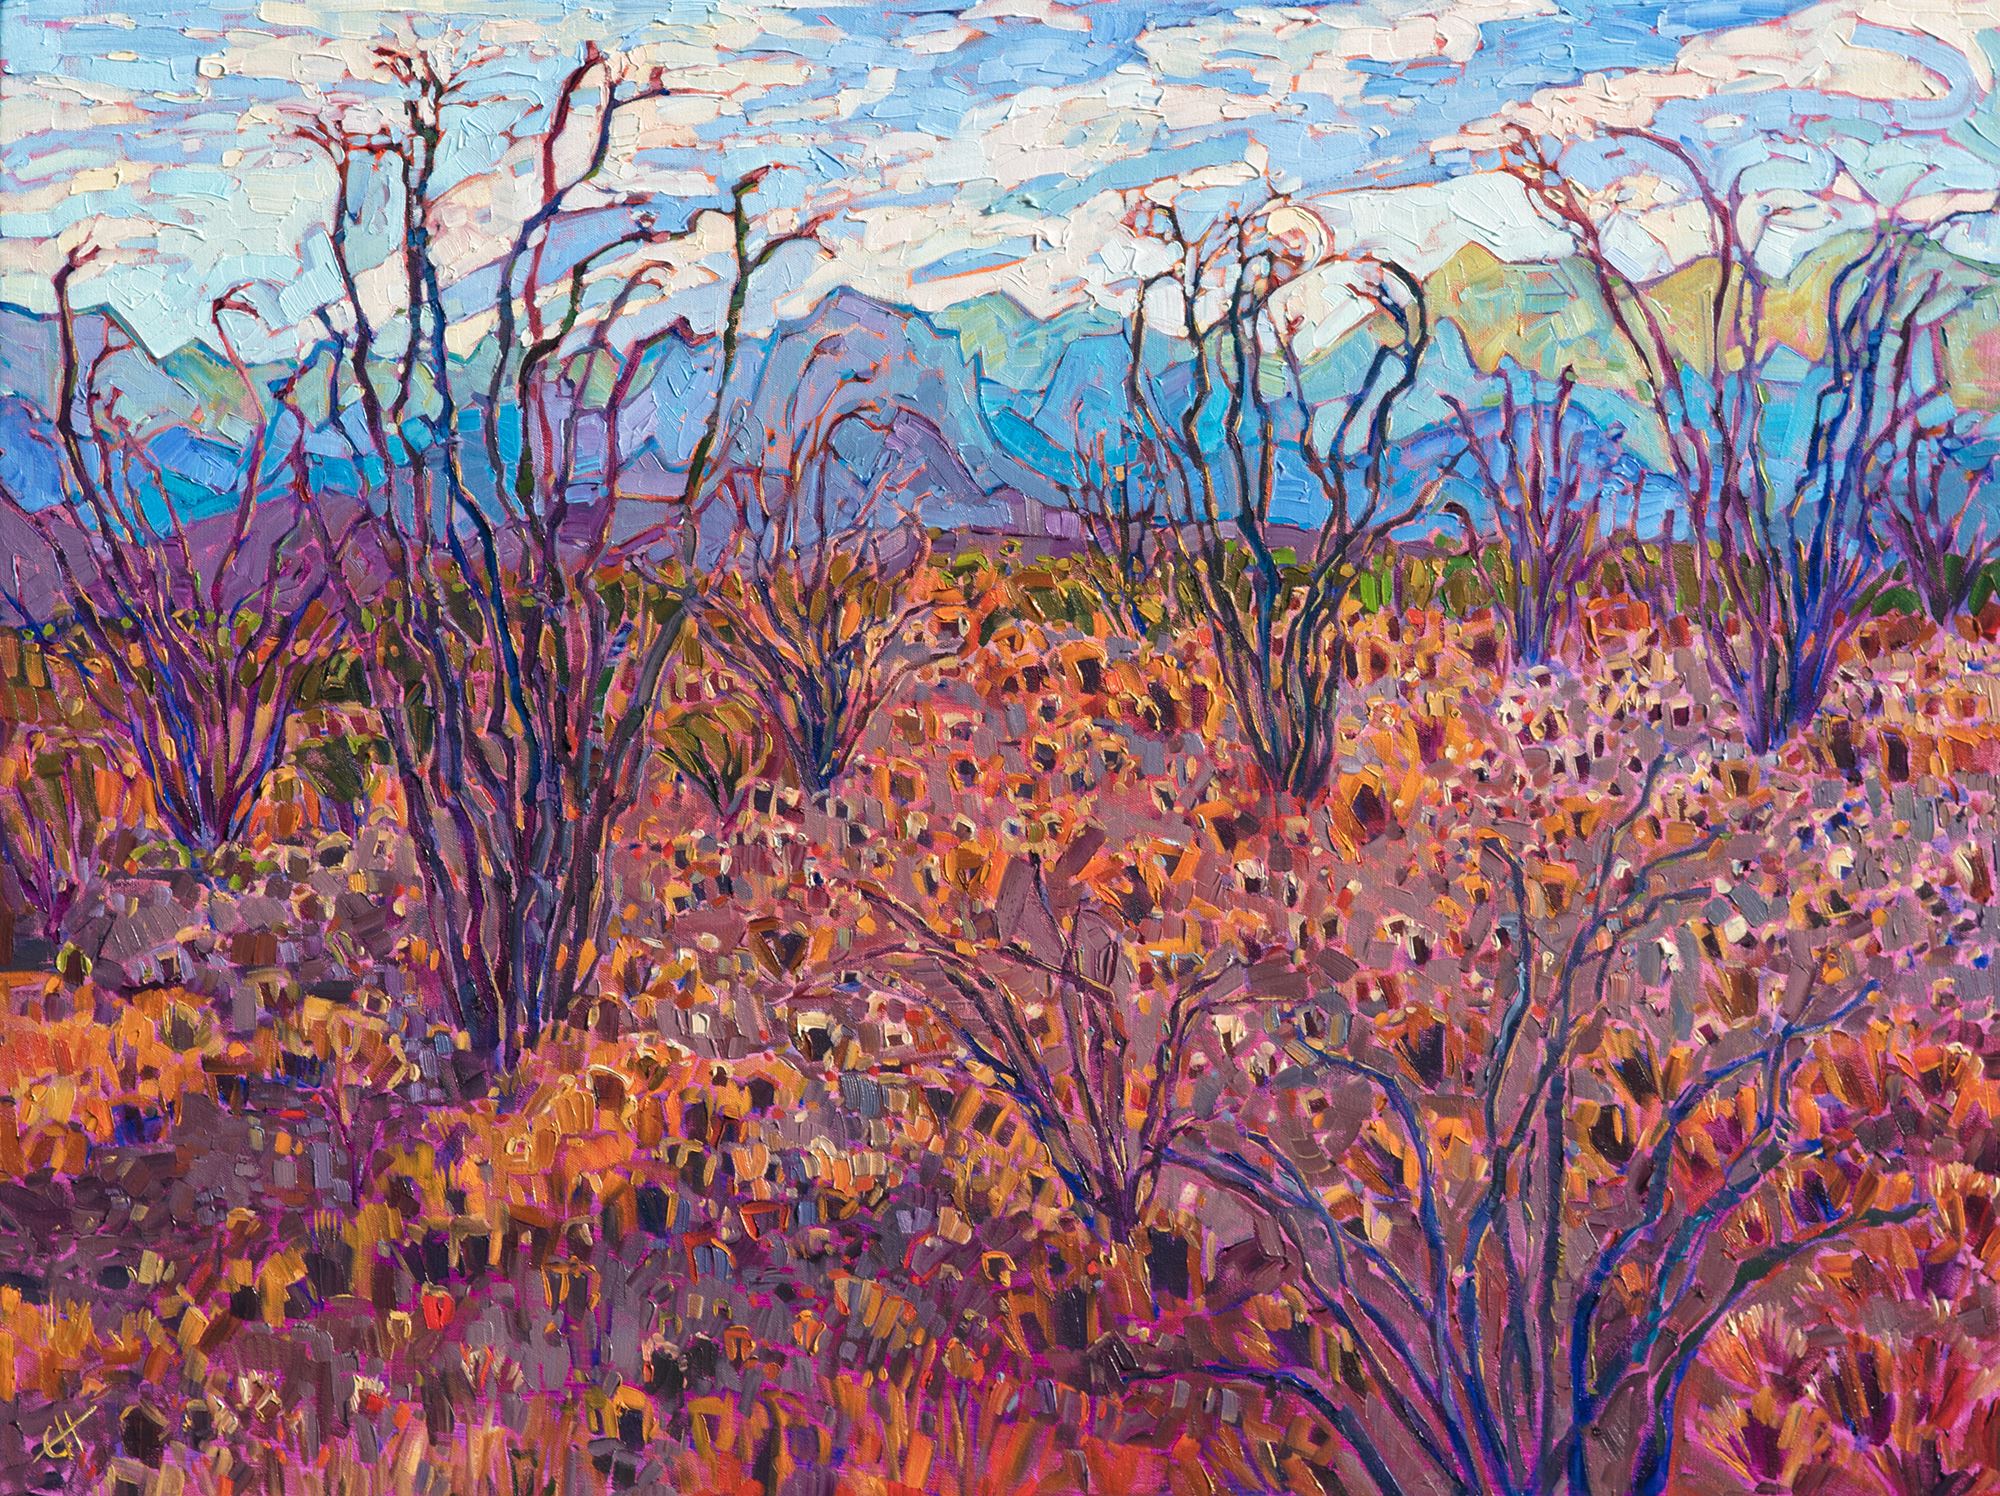 Erin Hanson’s Enigmatic Big Bend Show is a Huge Success